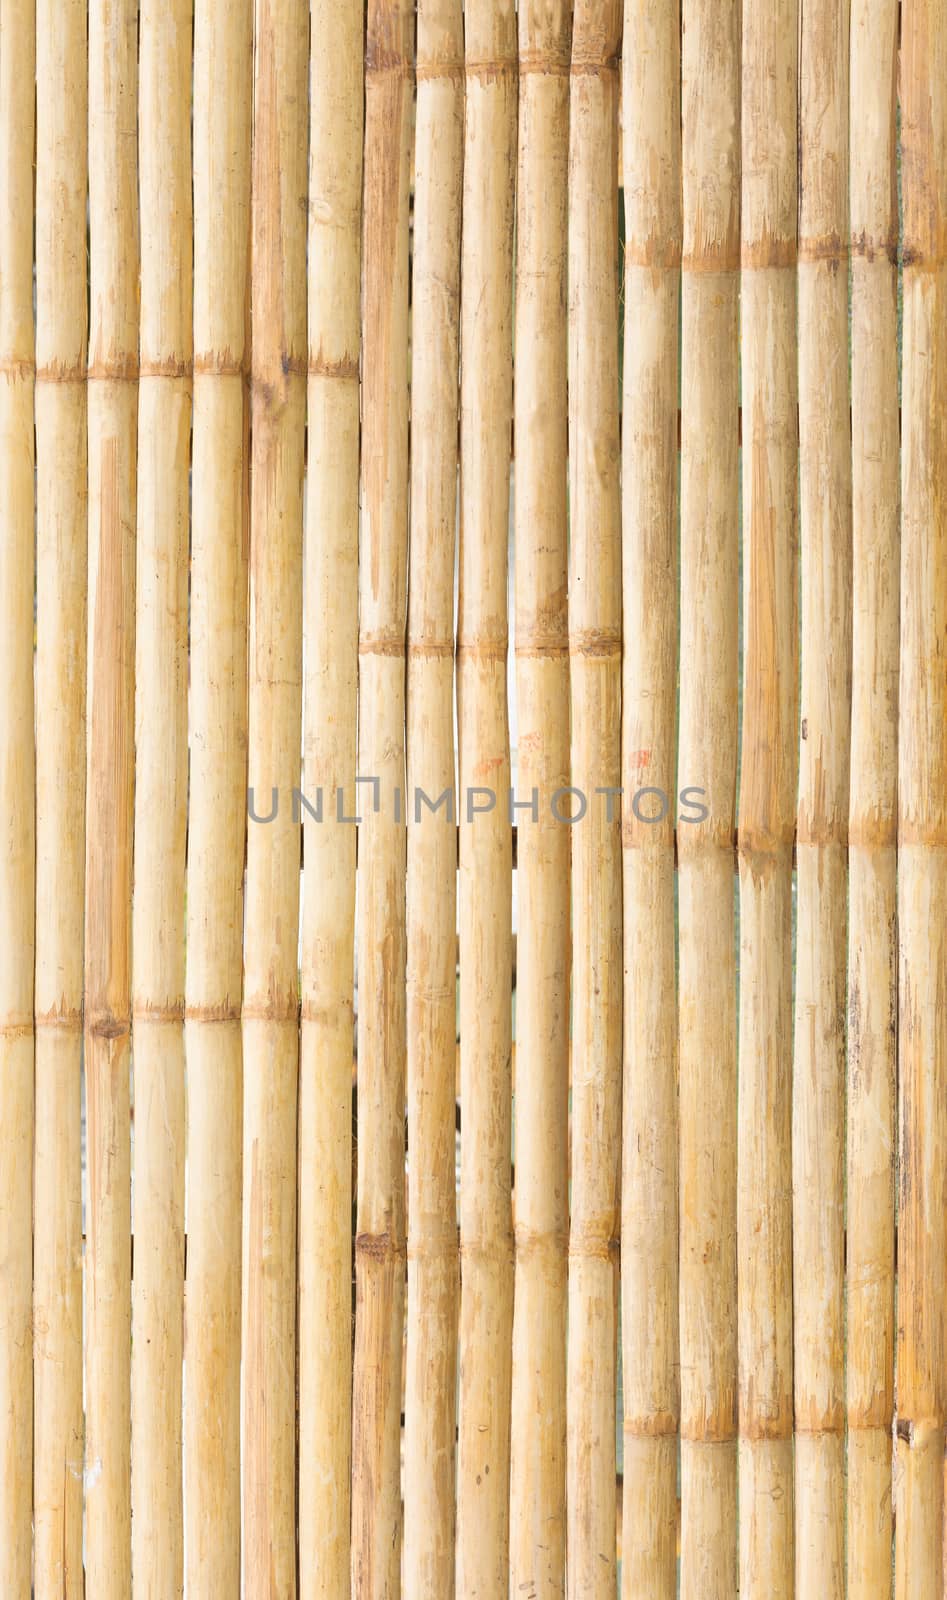 grunge yellow bamboo background and texture.